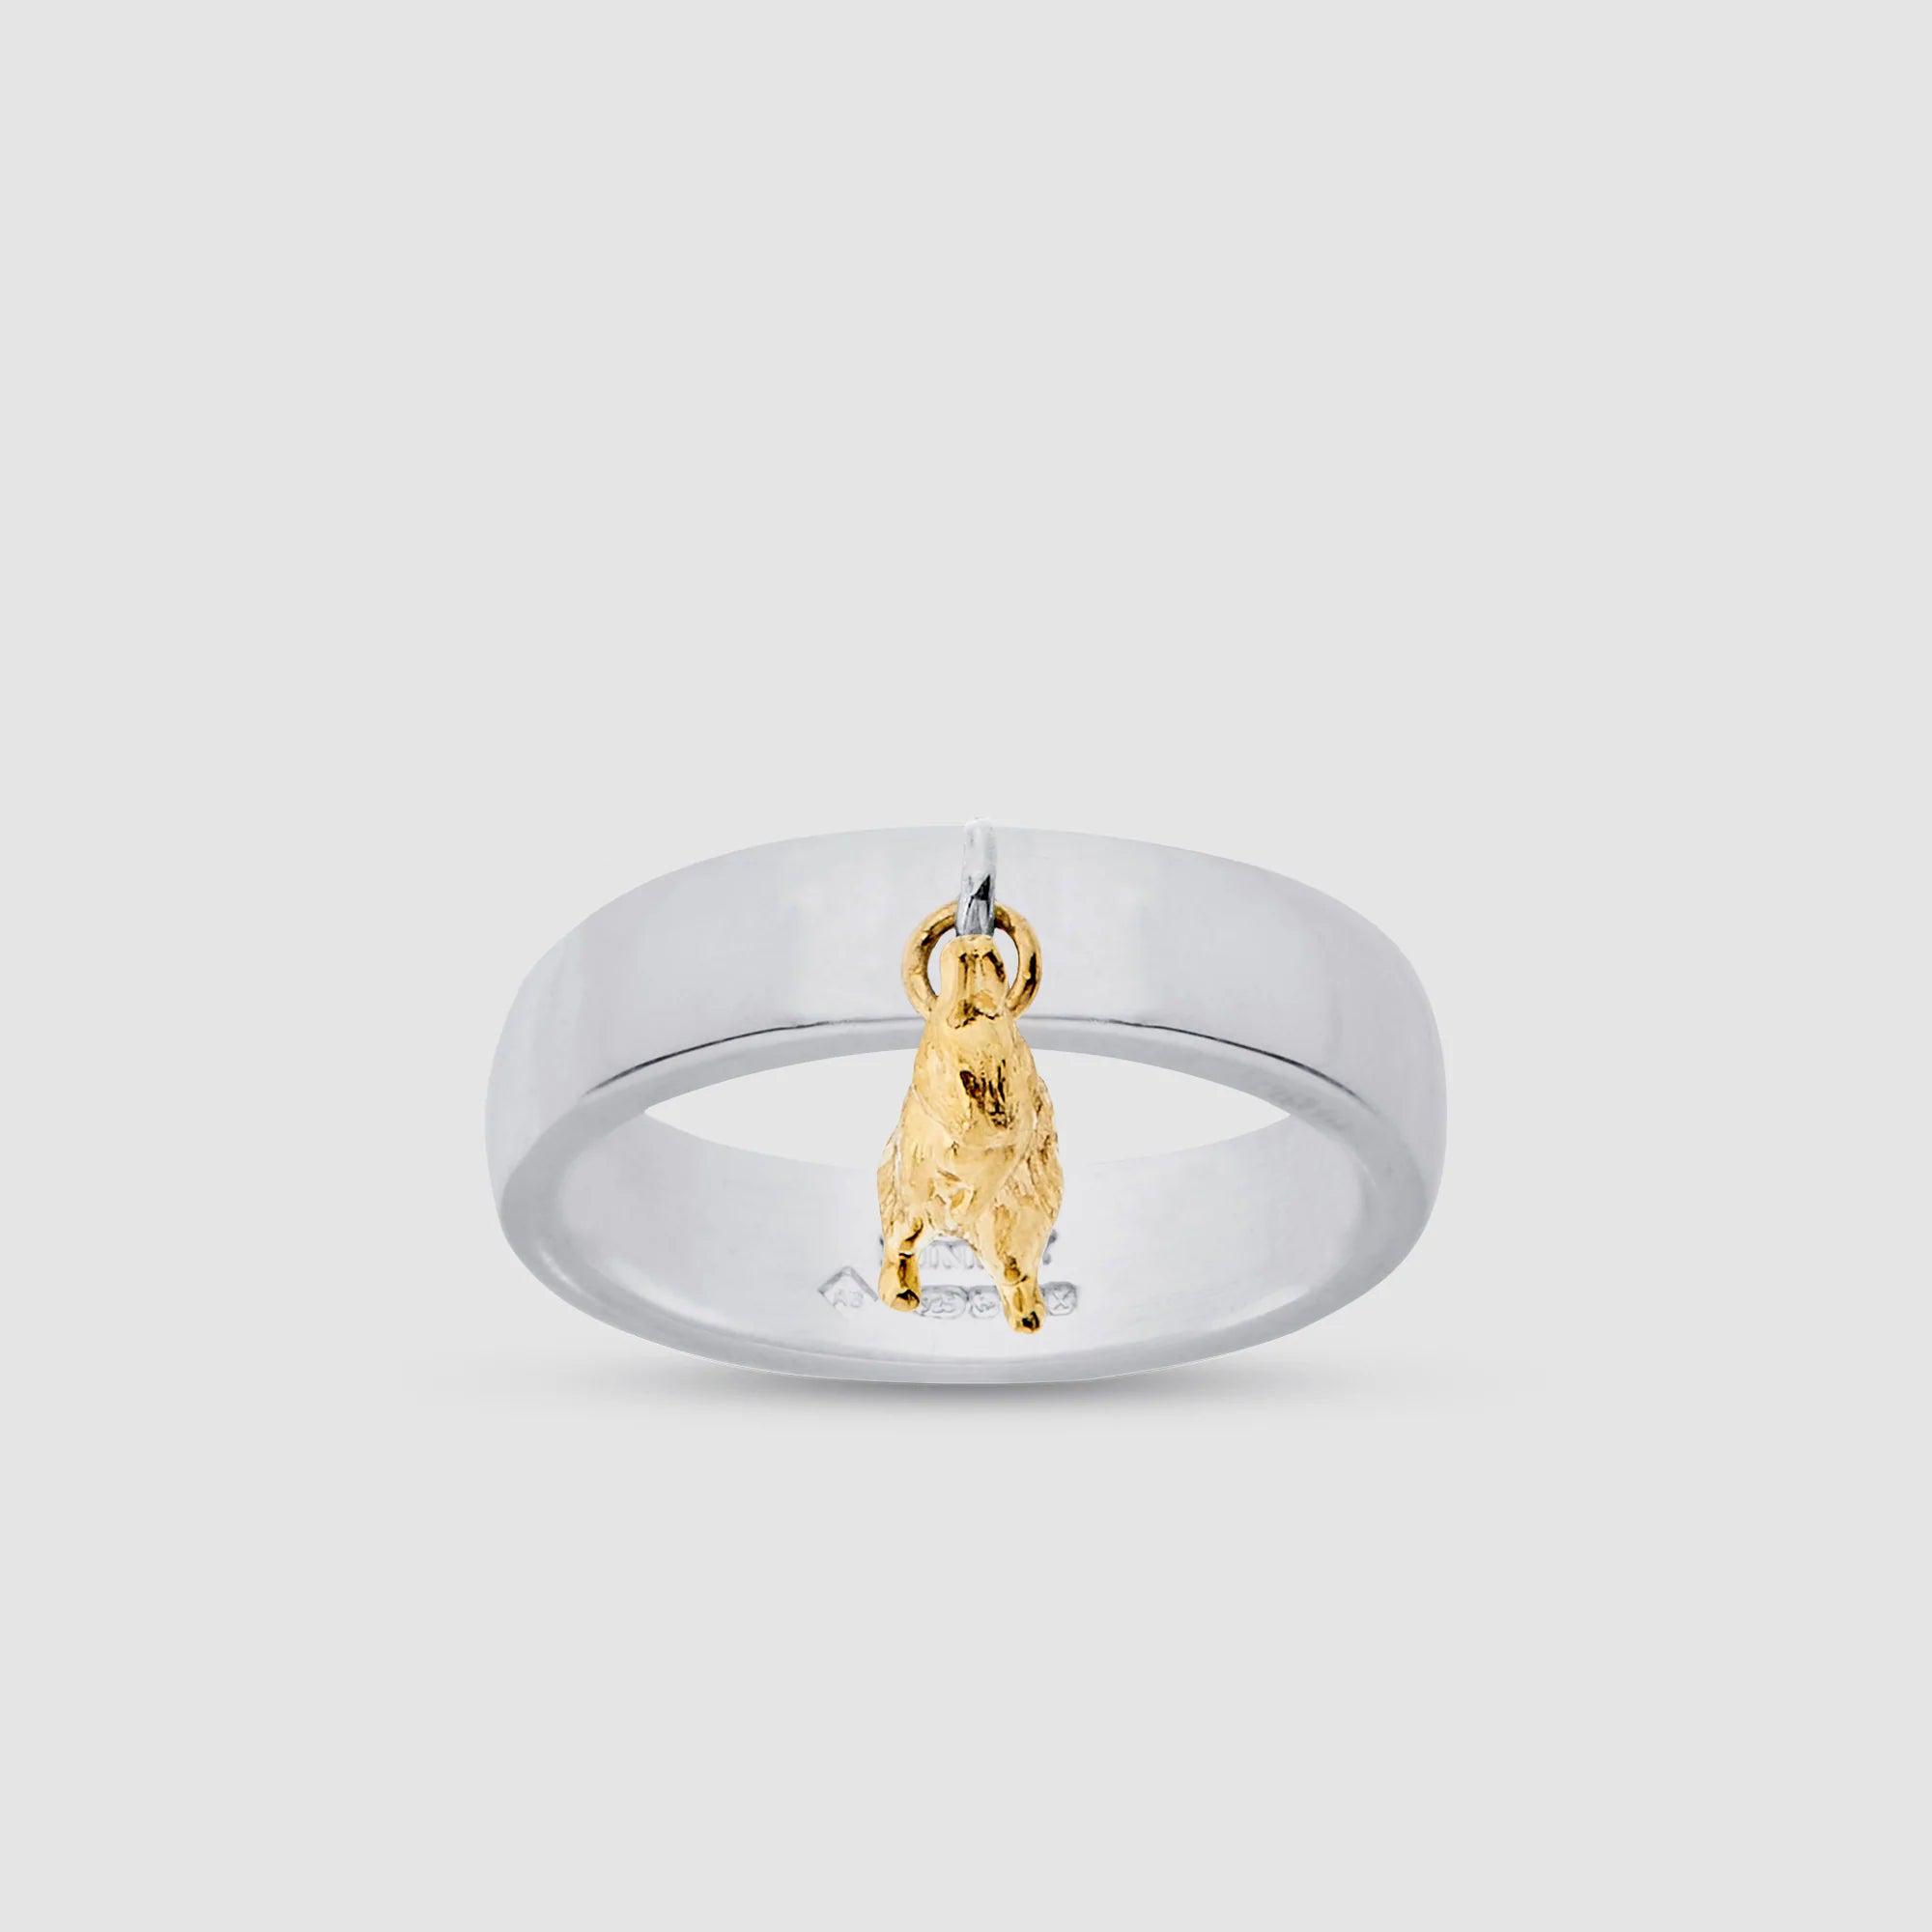 Bunney Silver Ring with Yellow Gold Rabbit Charm by BUNNEY